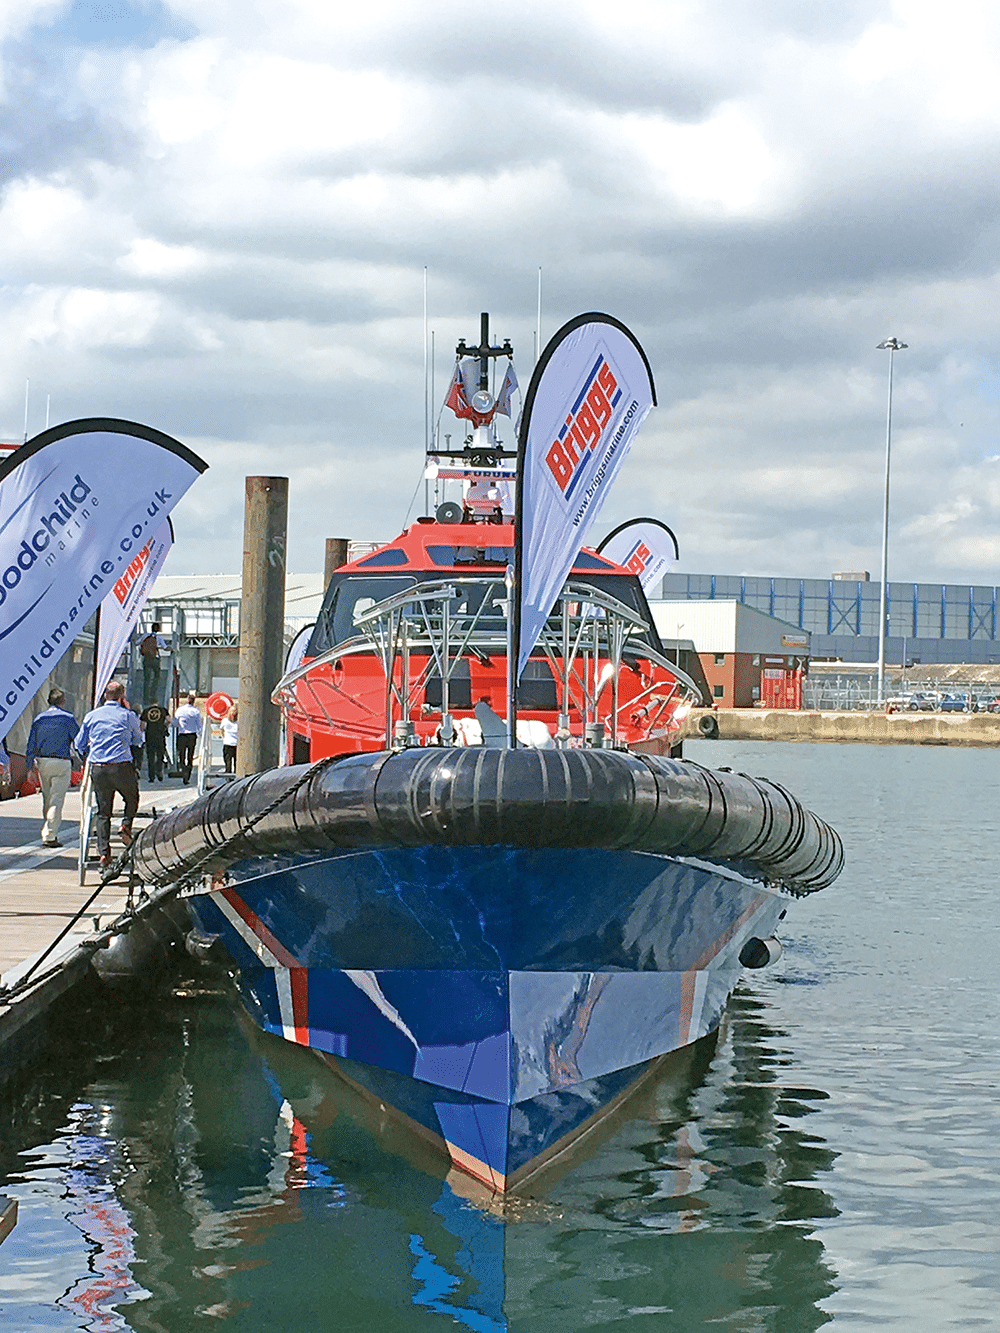 A pilot vessel as shown at the Seawork Show